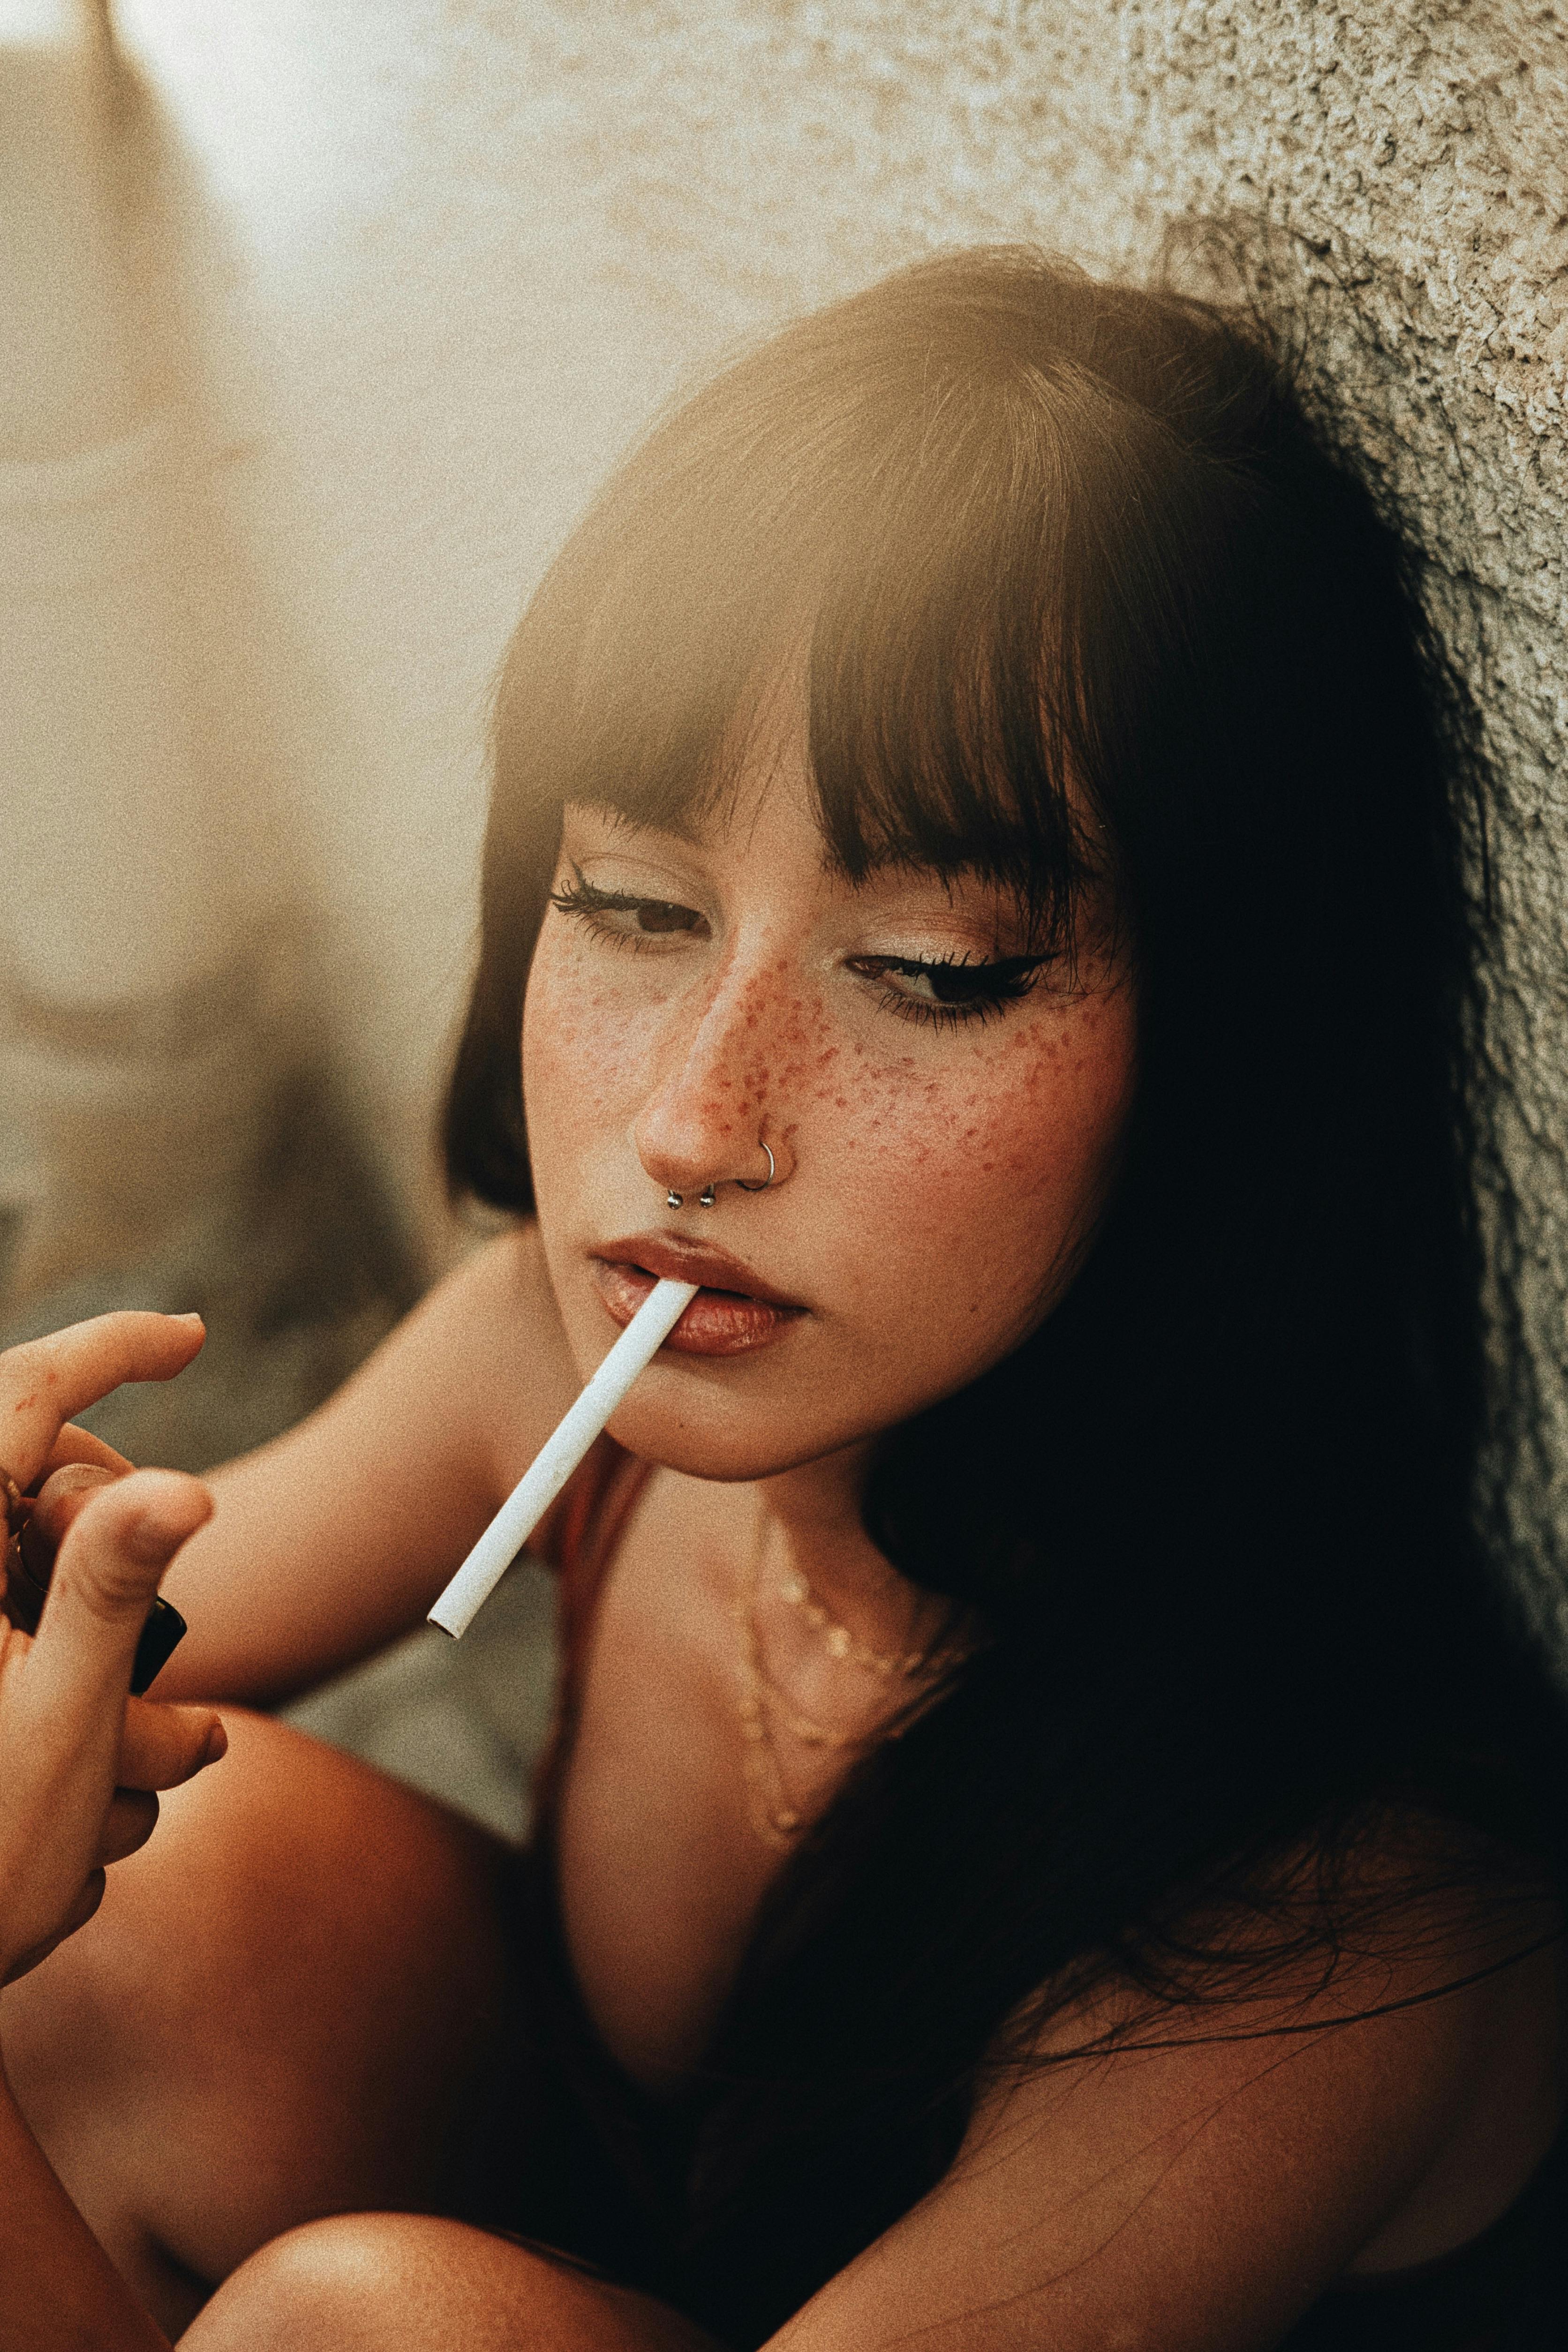 brunette with cigarette in mouth